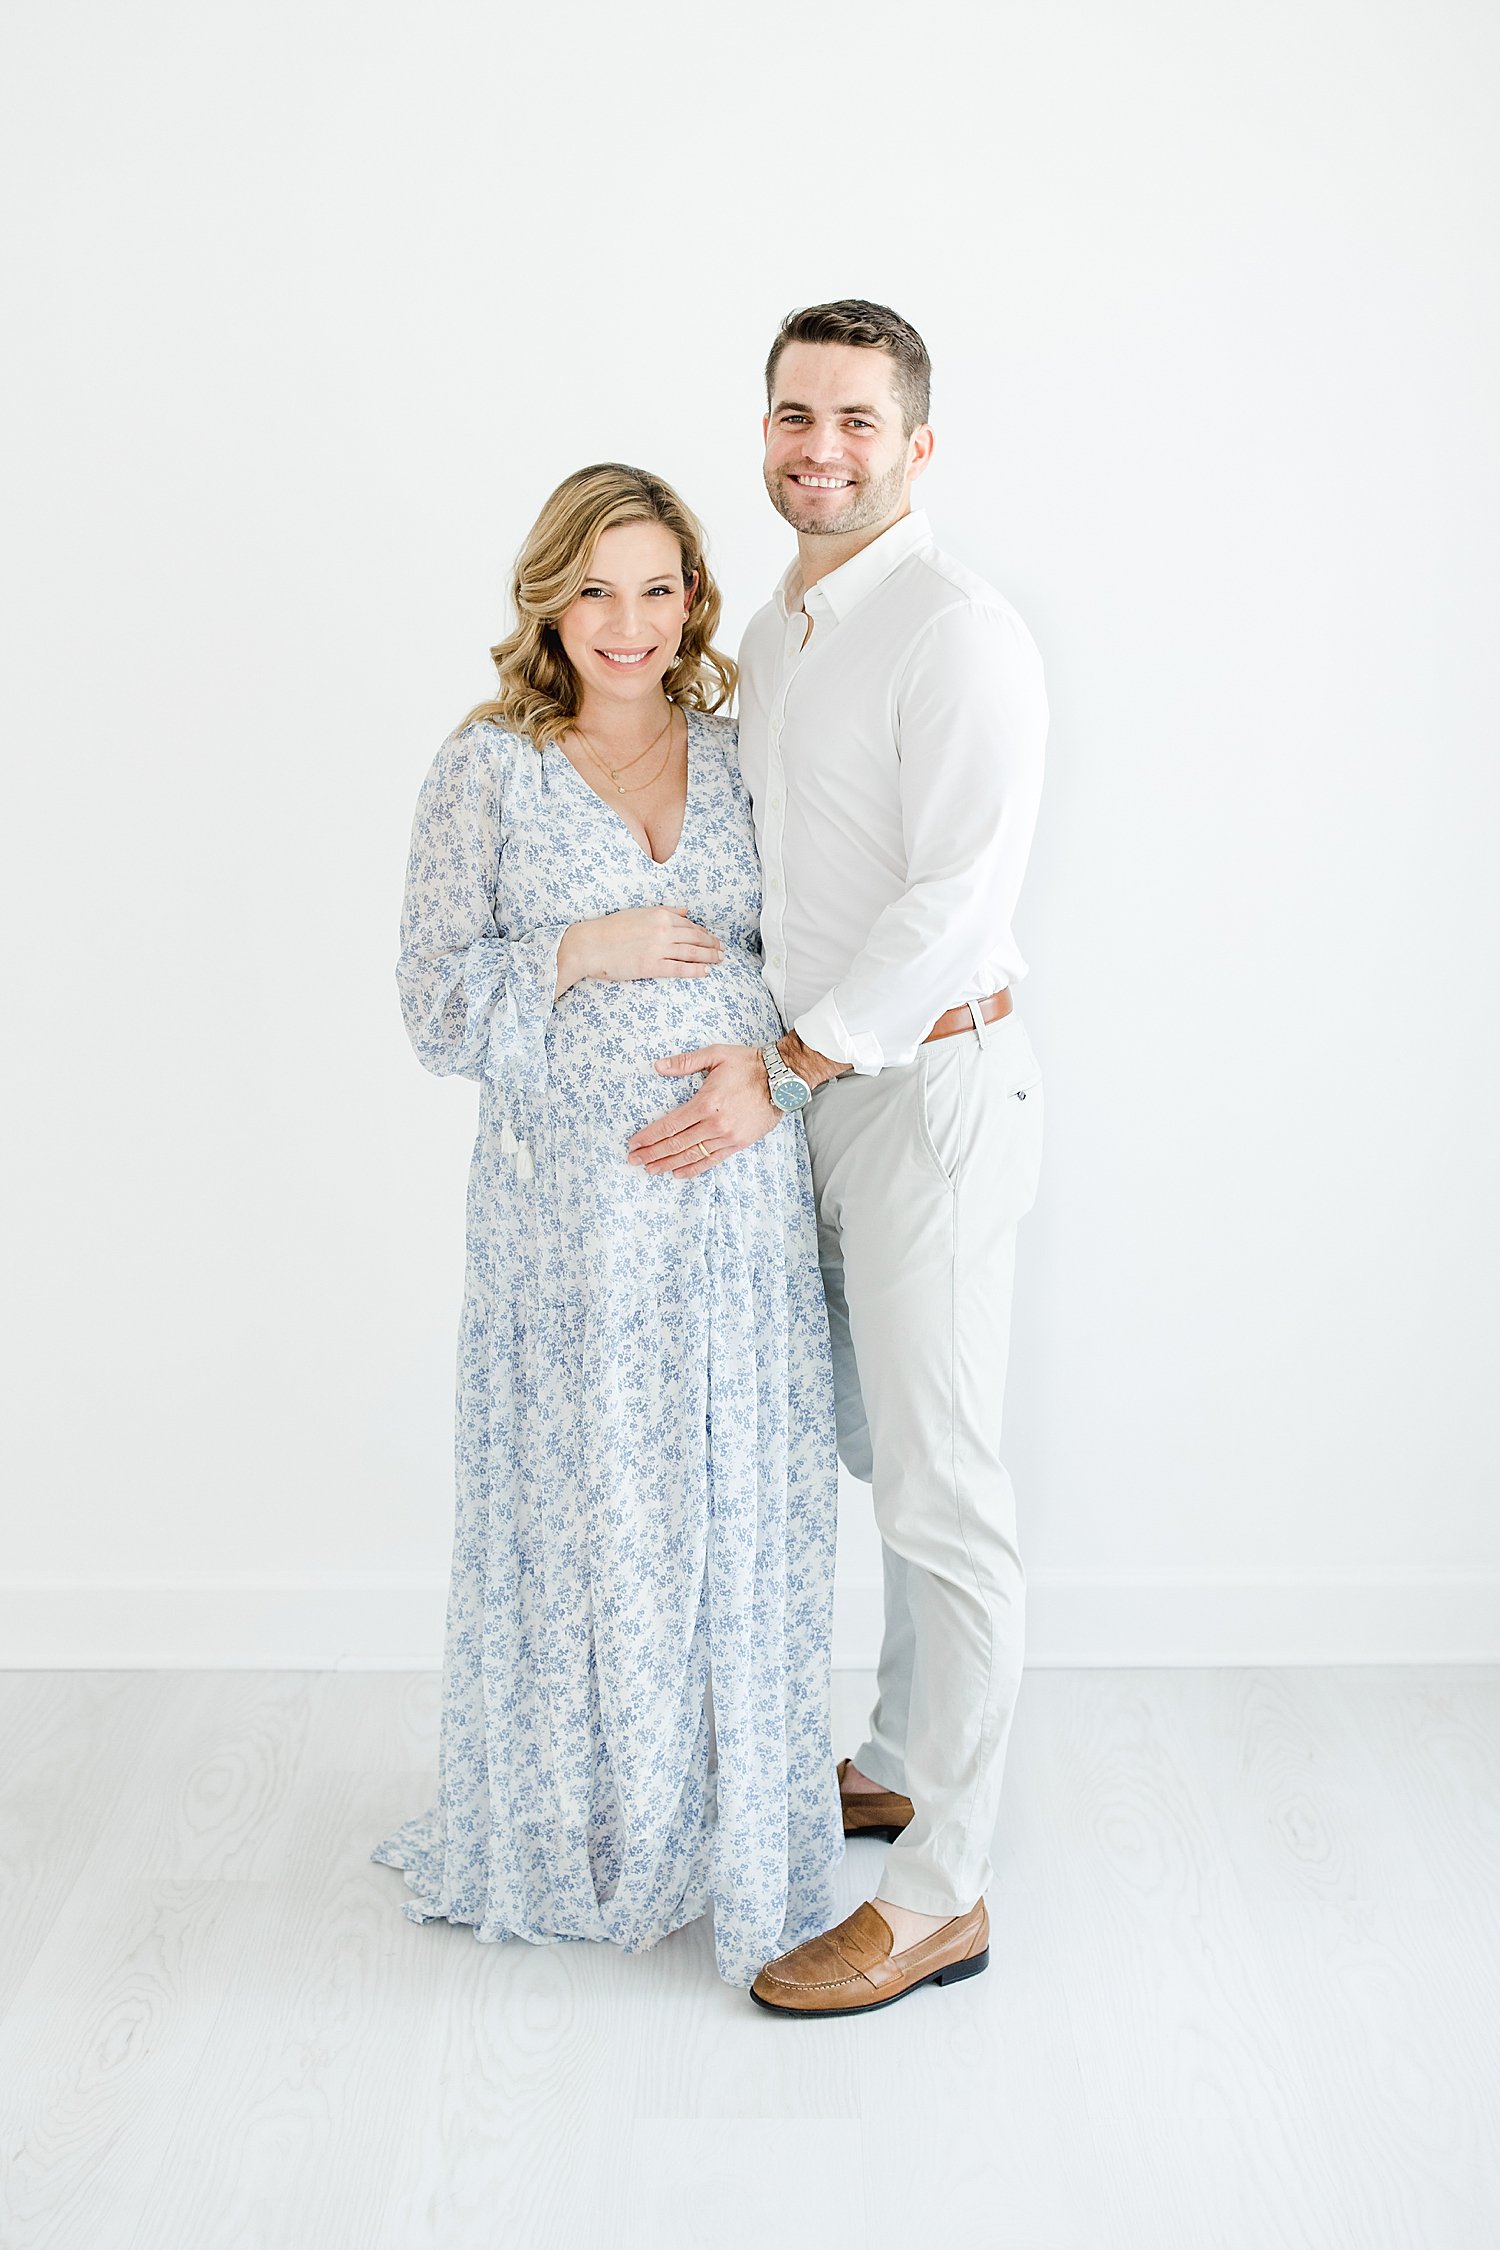 Expecting parents standing together for maternity photos with Kristin Wood Photography.